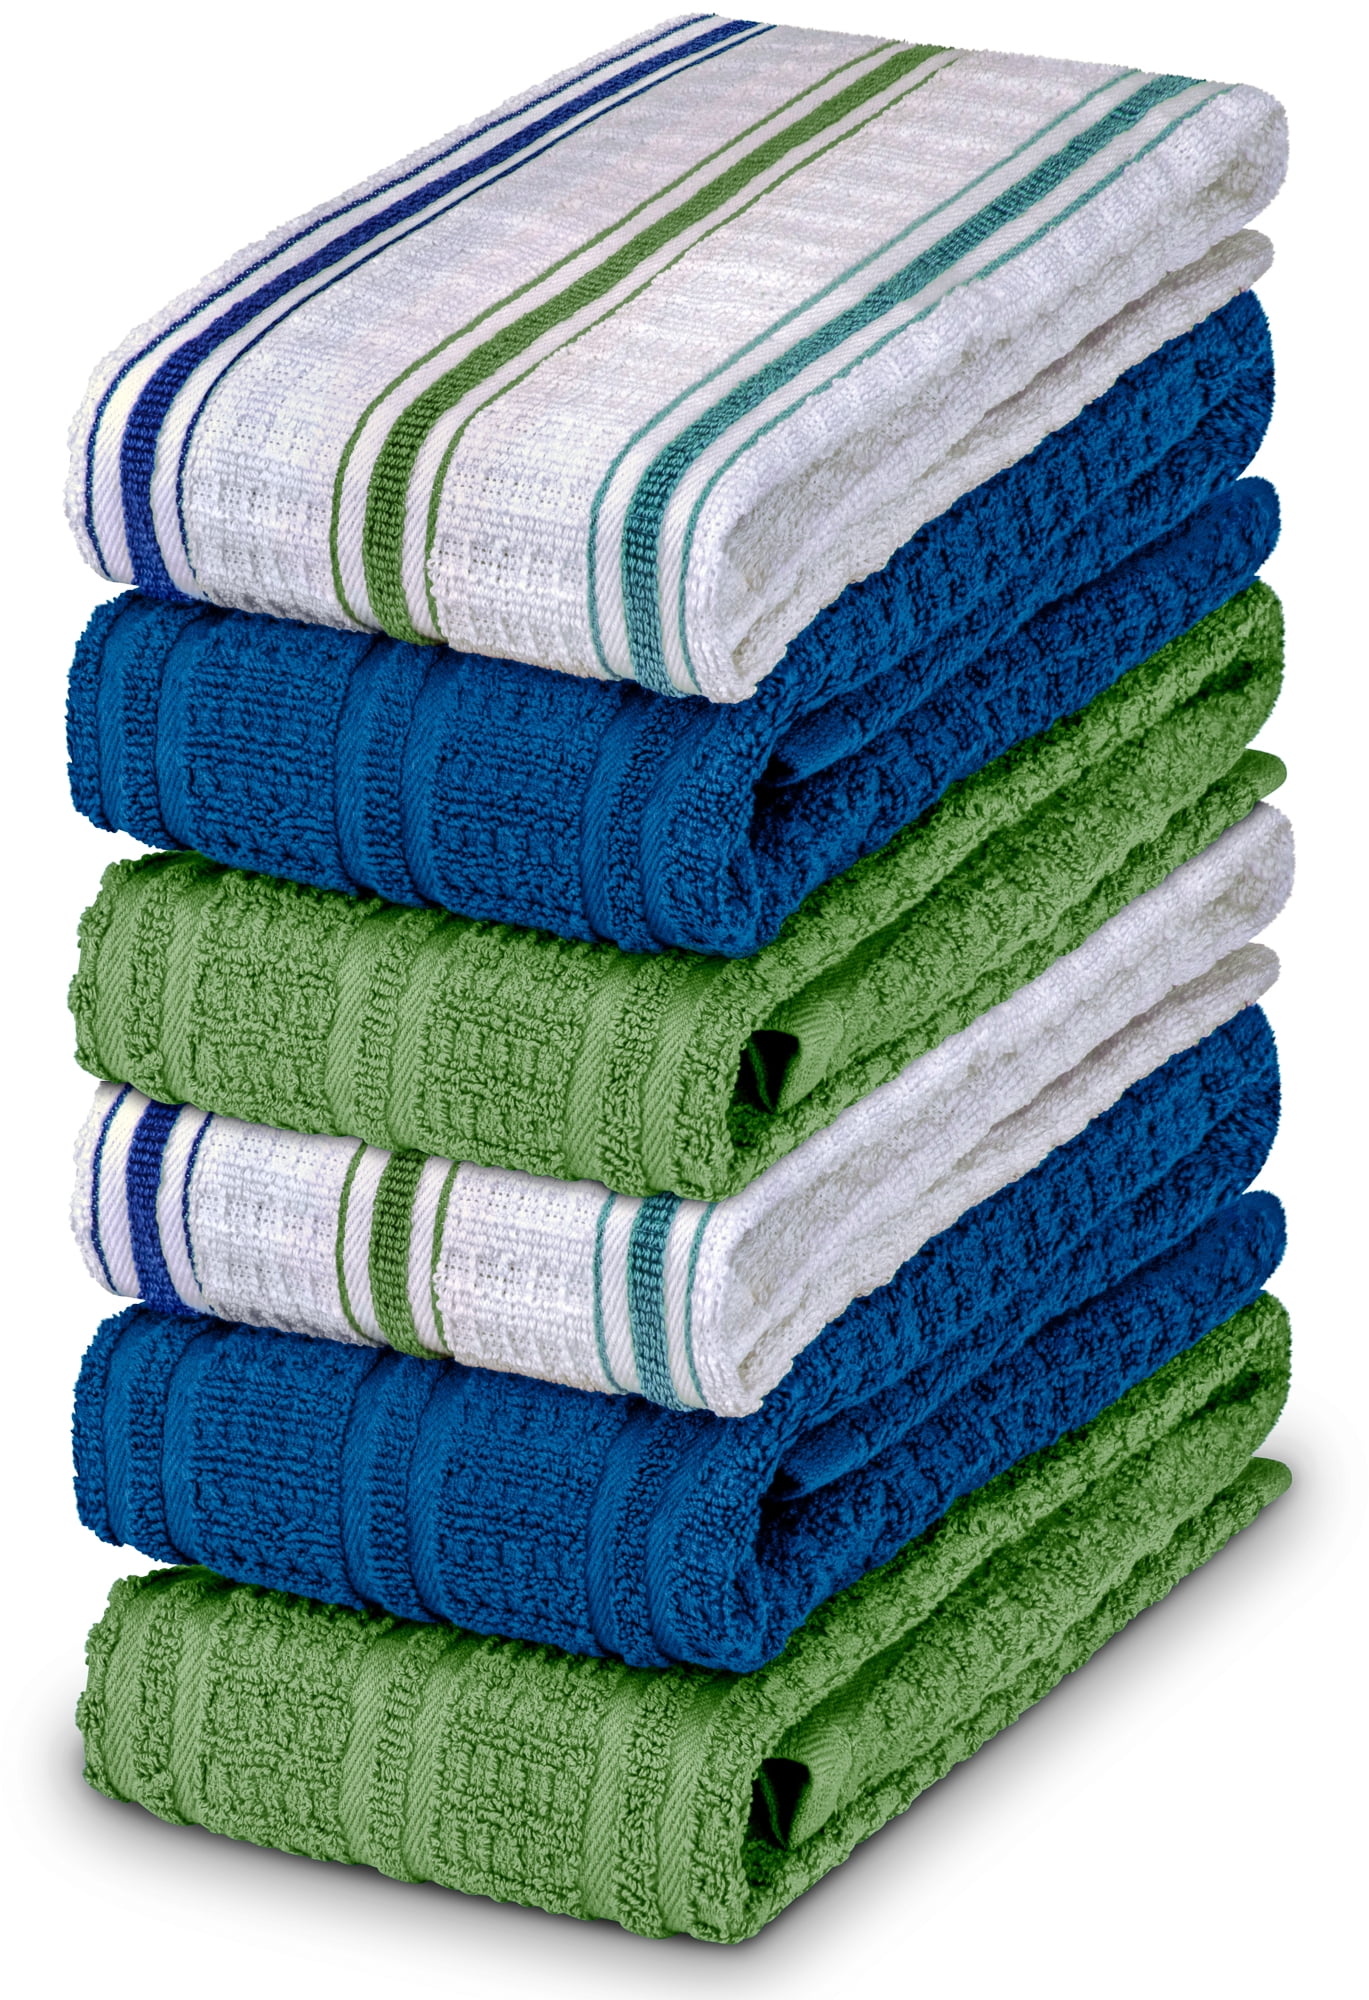 Bulk Barmops Pure White Soft Cotton Kitchen Towels 16x19 Atlas Towels Kitchen Bar Mop Cleaning Towels Eco-Friendly 12 Pack for Resaturant & General Cleaning Shop Towels and Rags